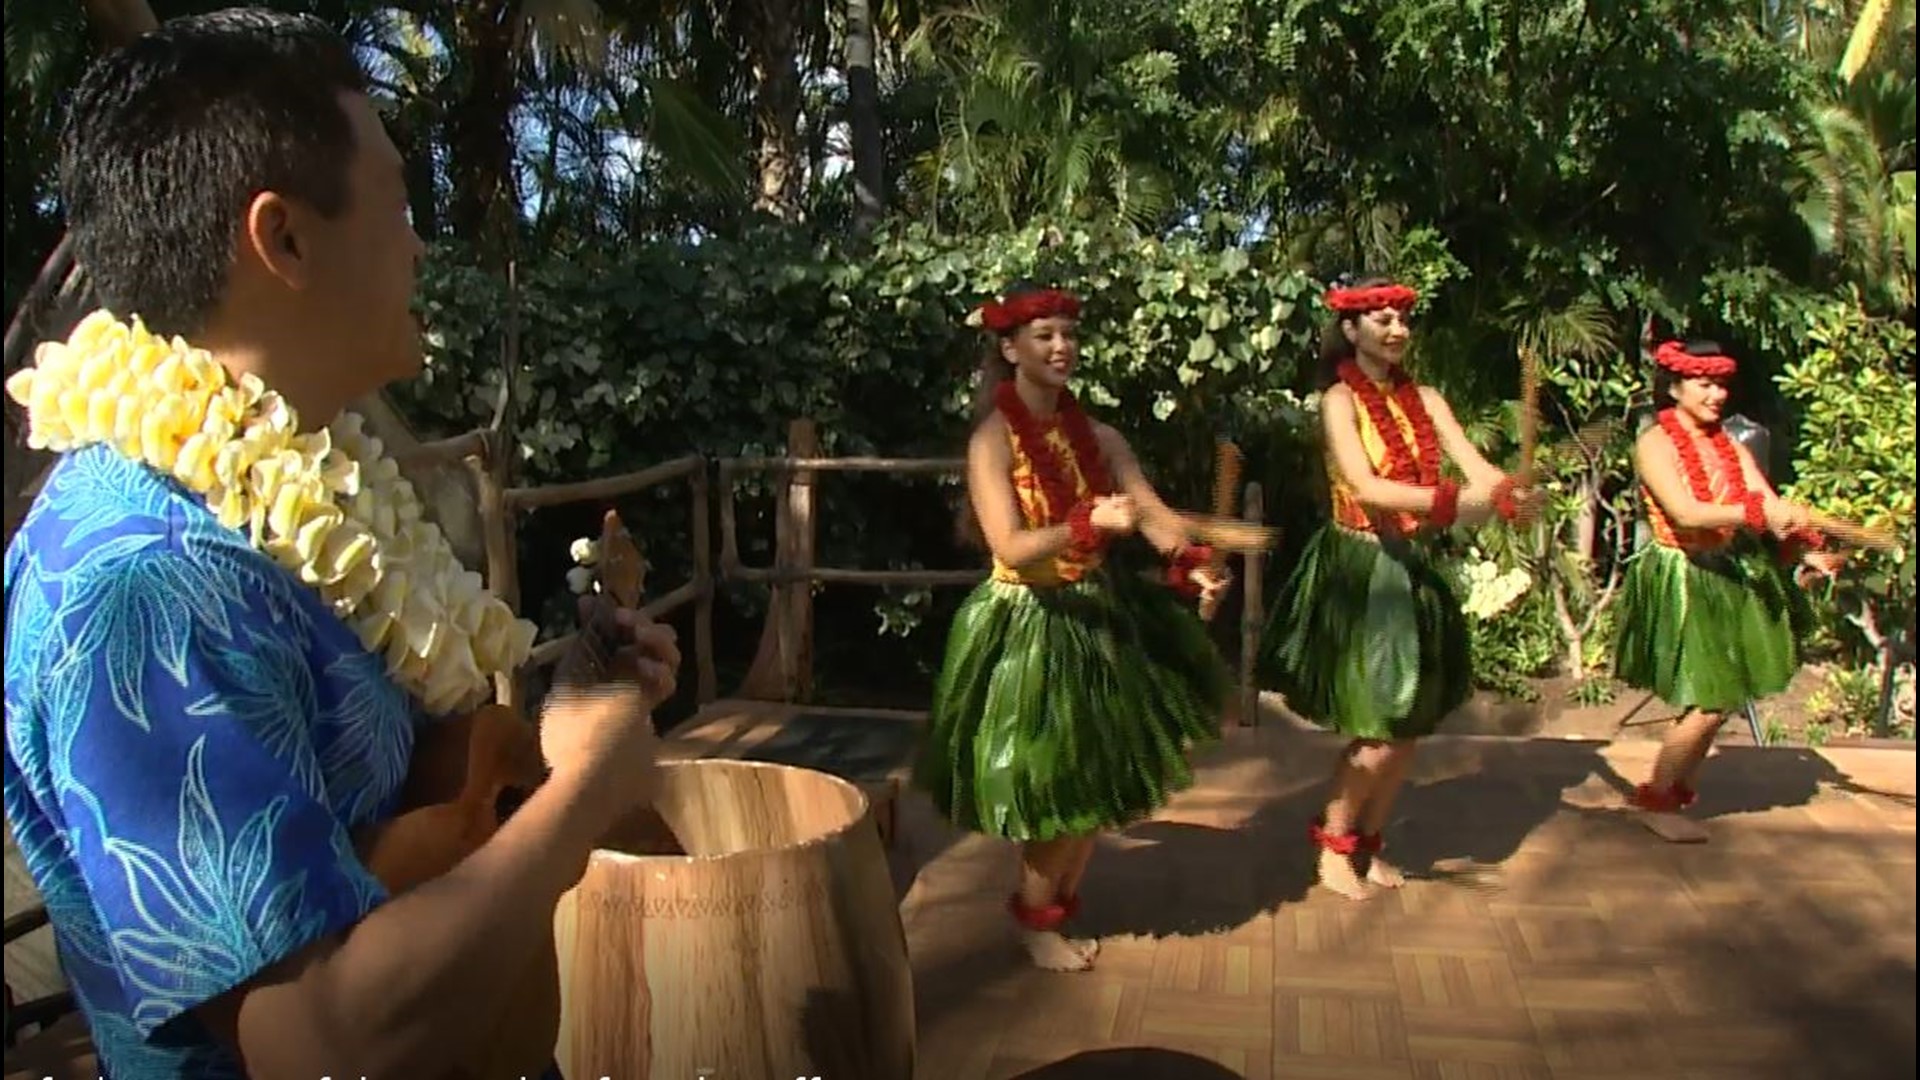 Visitors come away with an appreciation of this unique island culture.  Sponsored by Aulani, a Disney Resort and Spa.